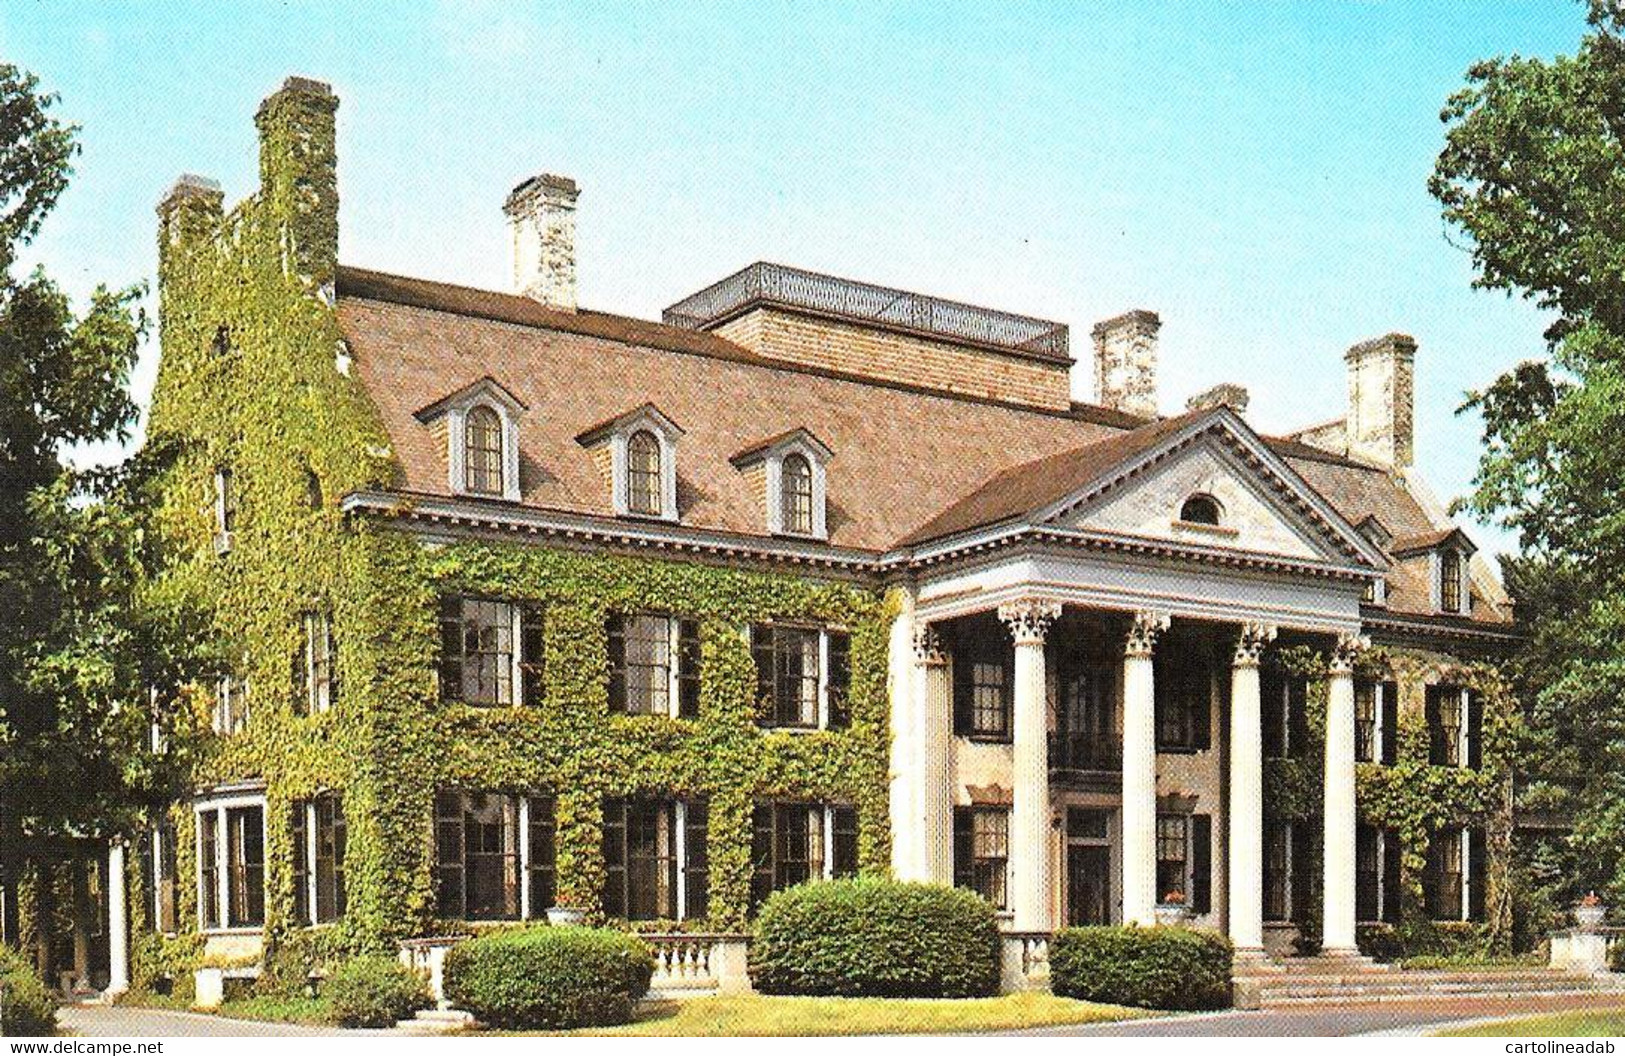 [DC12500] CPA - ROCHESTER - INTERNATIONAL MUSEUM OF FOTOGRAPHY AT GEORGE EASTMAN HOUSE - Non Viaggiata - Old Postcard - Rochester